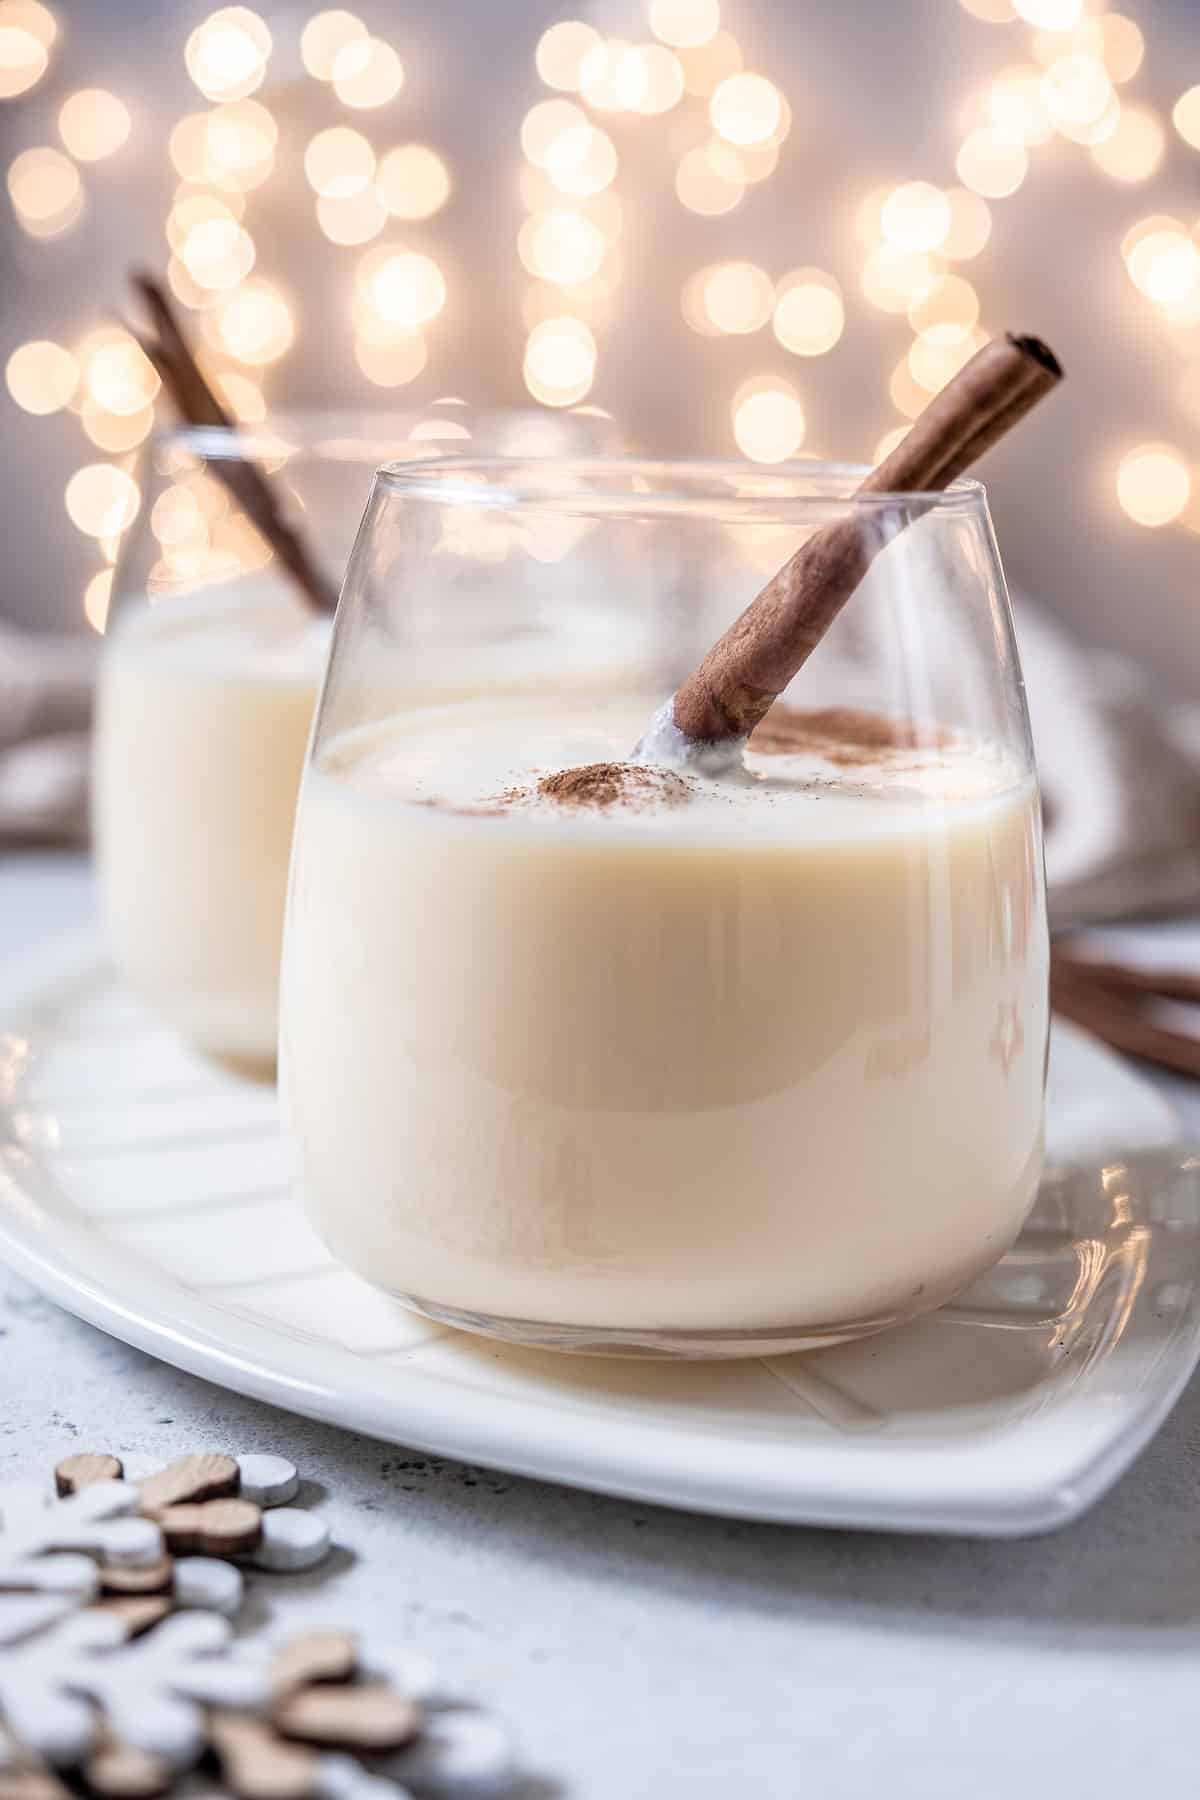 Two stemless wine glasses full of homemade eggnog, garnished with nutmeg and a cinnamon stick.